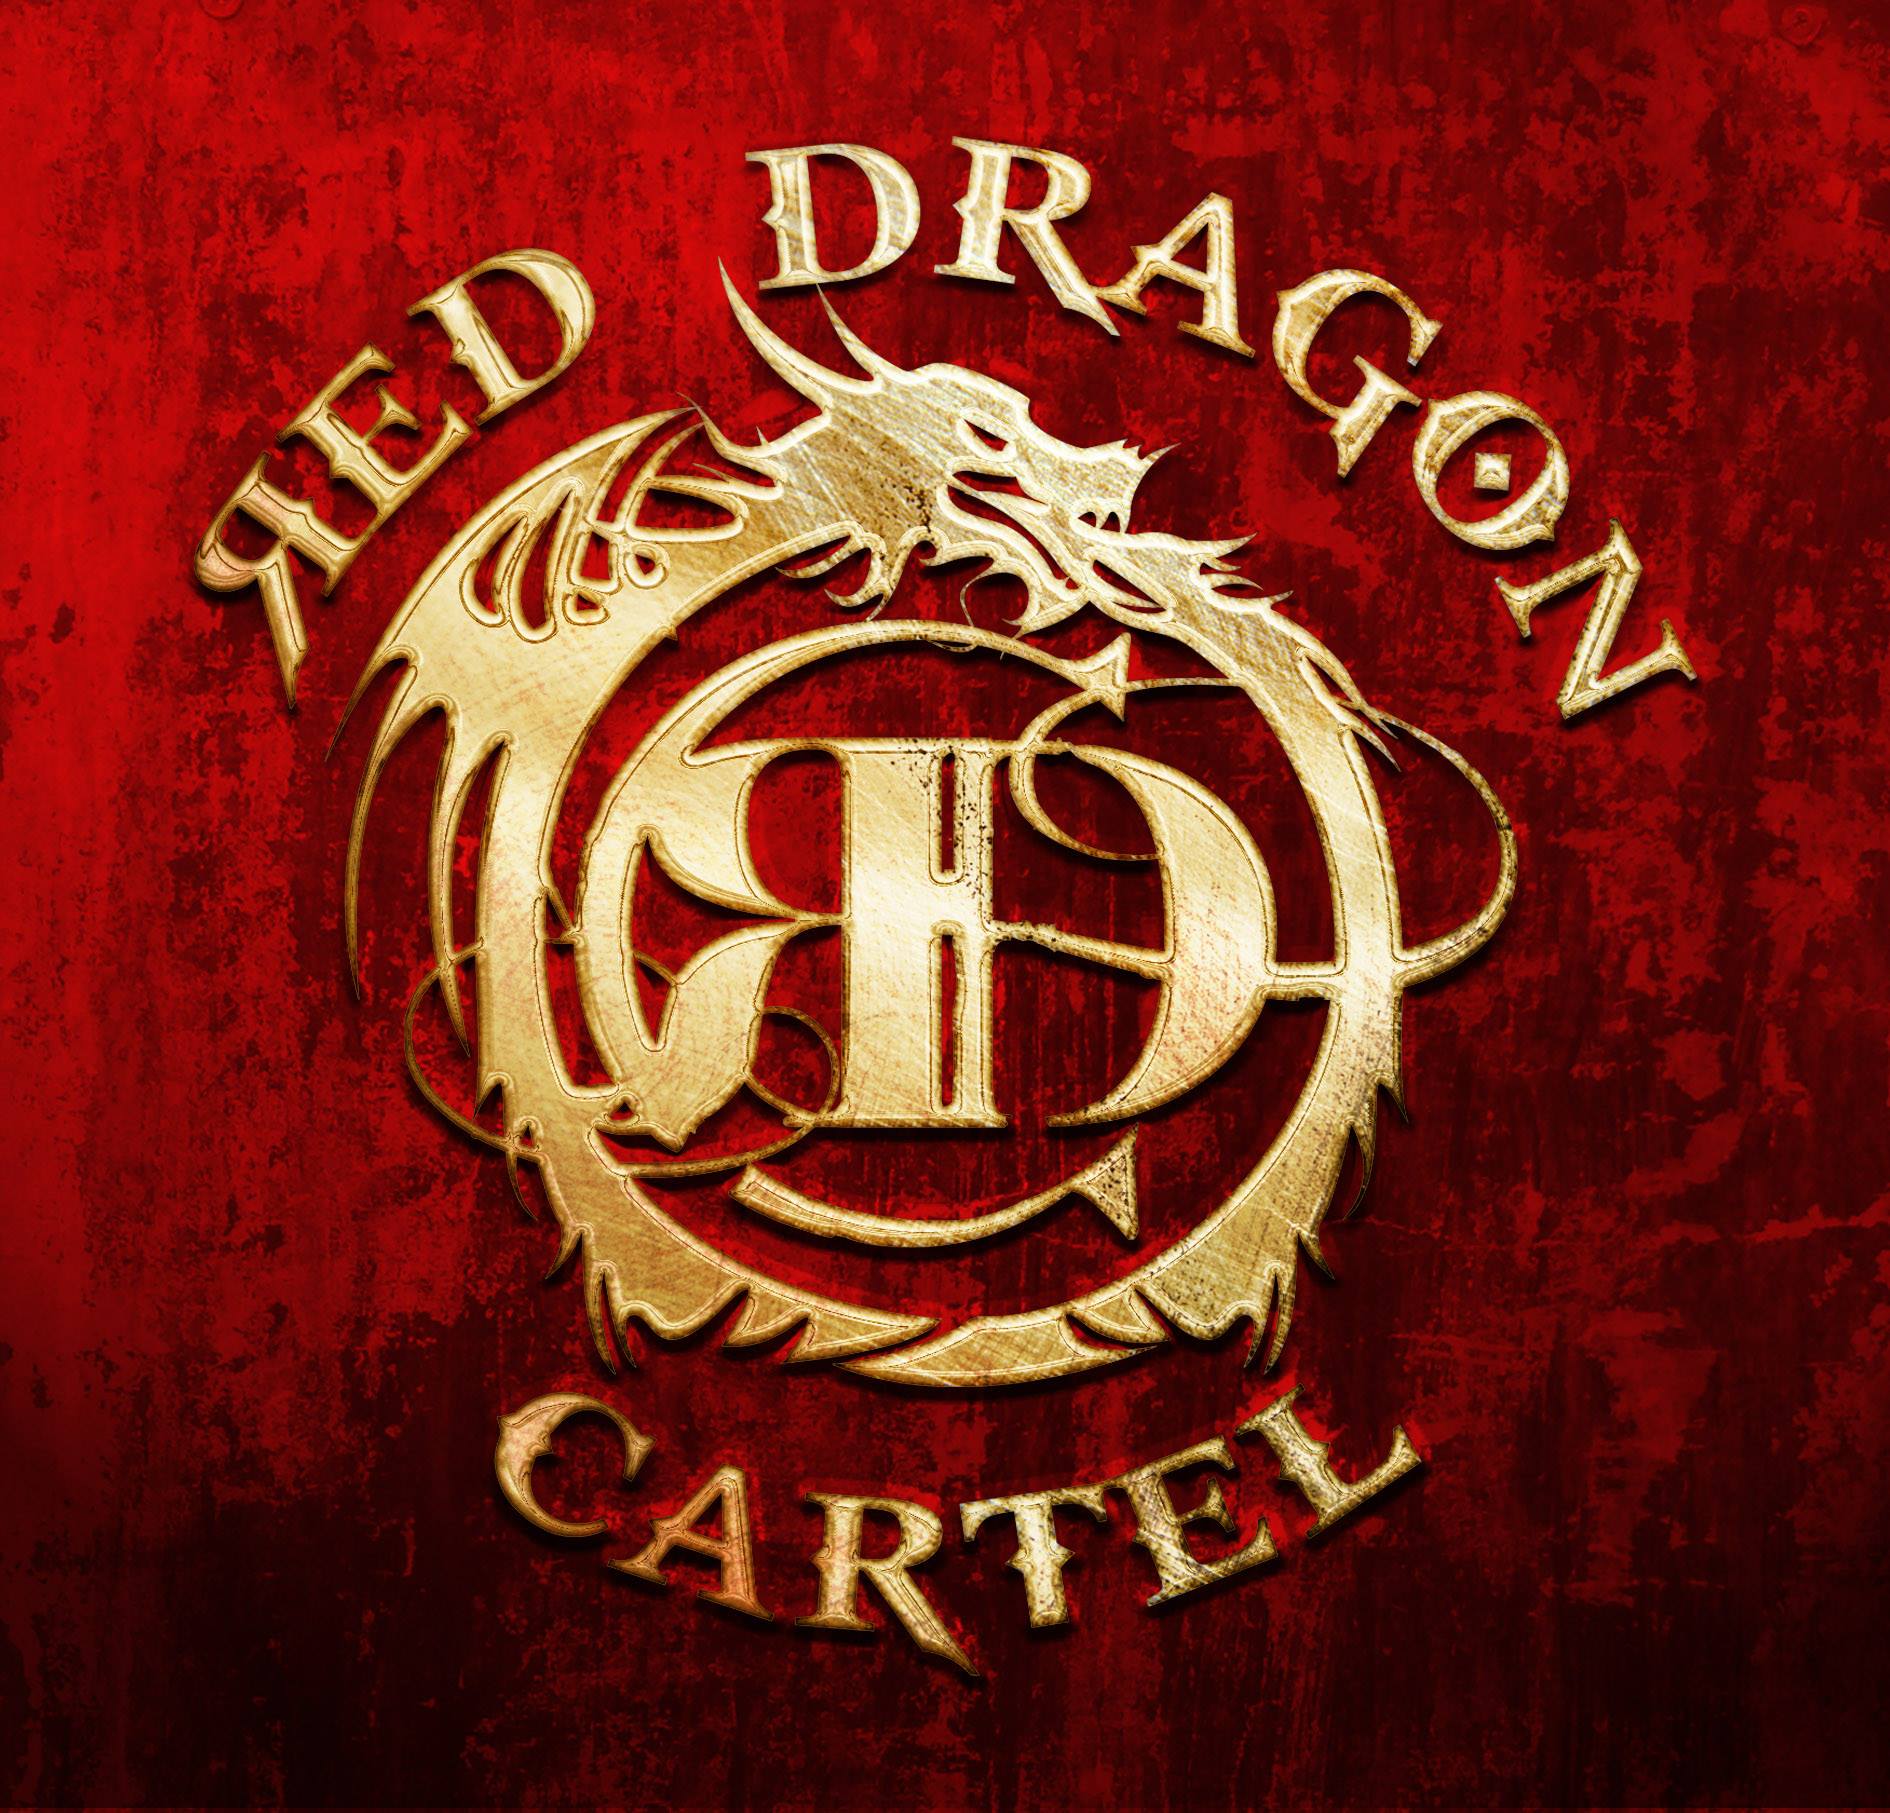 News Added Dec 18, 2013 Pre-order album here: http://smarturl.it/reddragoncartel Includes instant download of "Deceived". Out January 28th, 2014 in North America / January 24th 2014 in Europe / January 27th in UK. Jake E. Lee is the former guitarist for Ozzy Osbourne (on the "Bark at the Moon" and "The Ultimate Sins" albums). After a […]